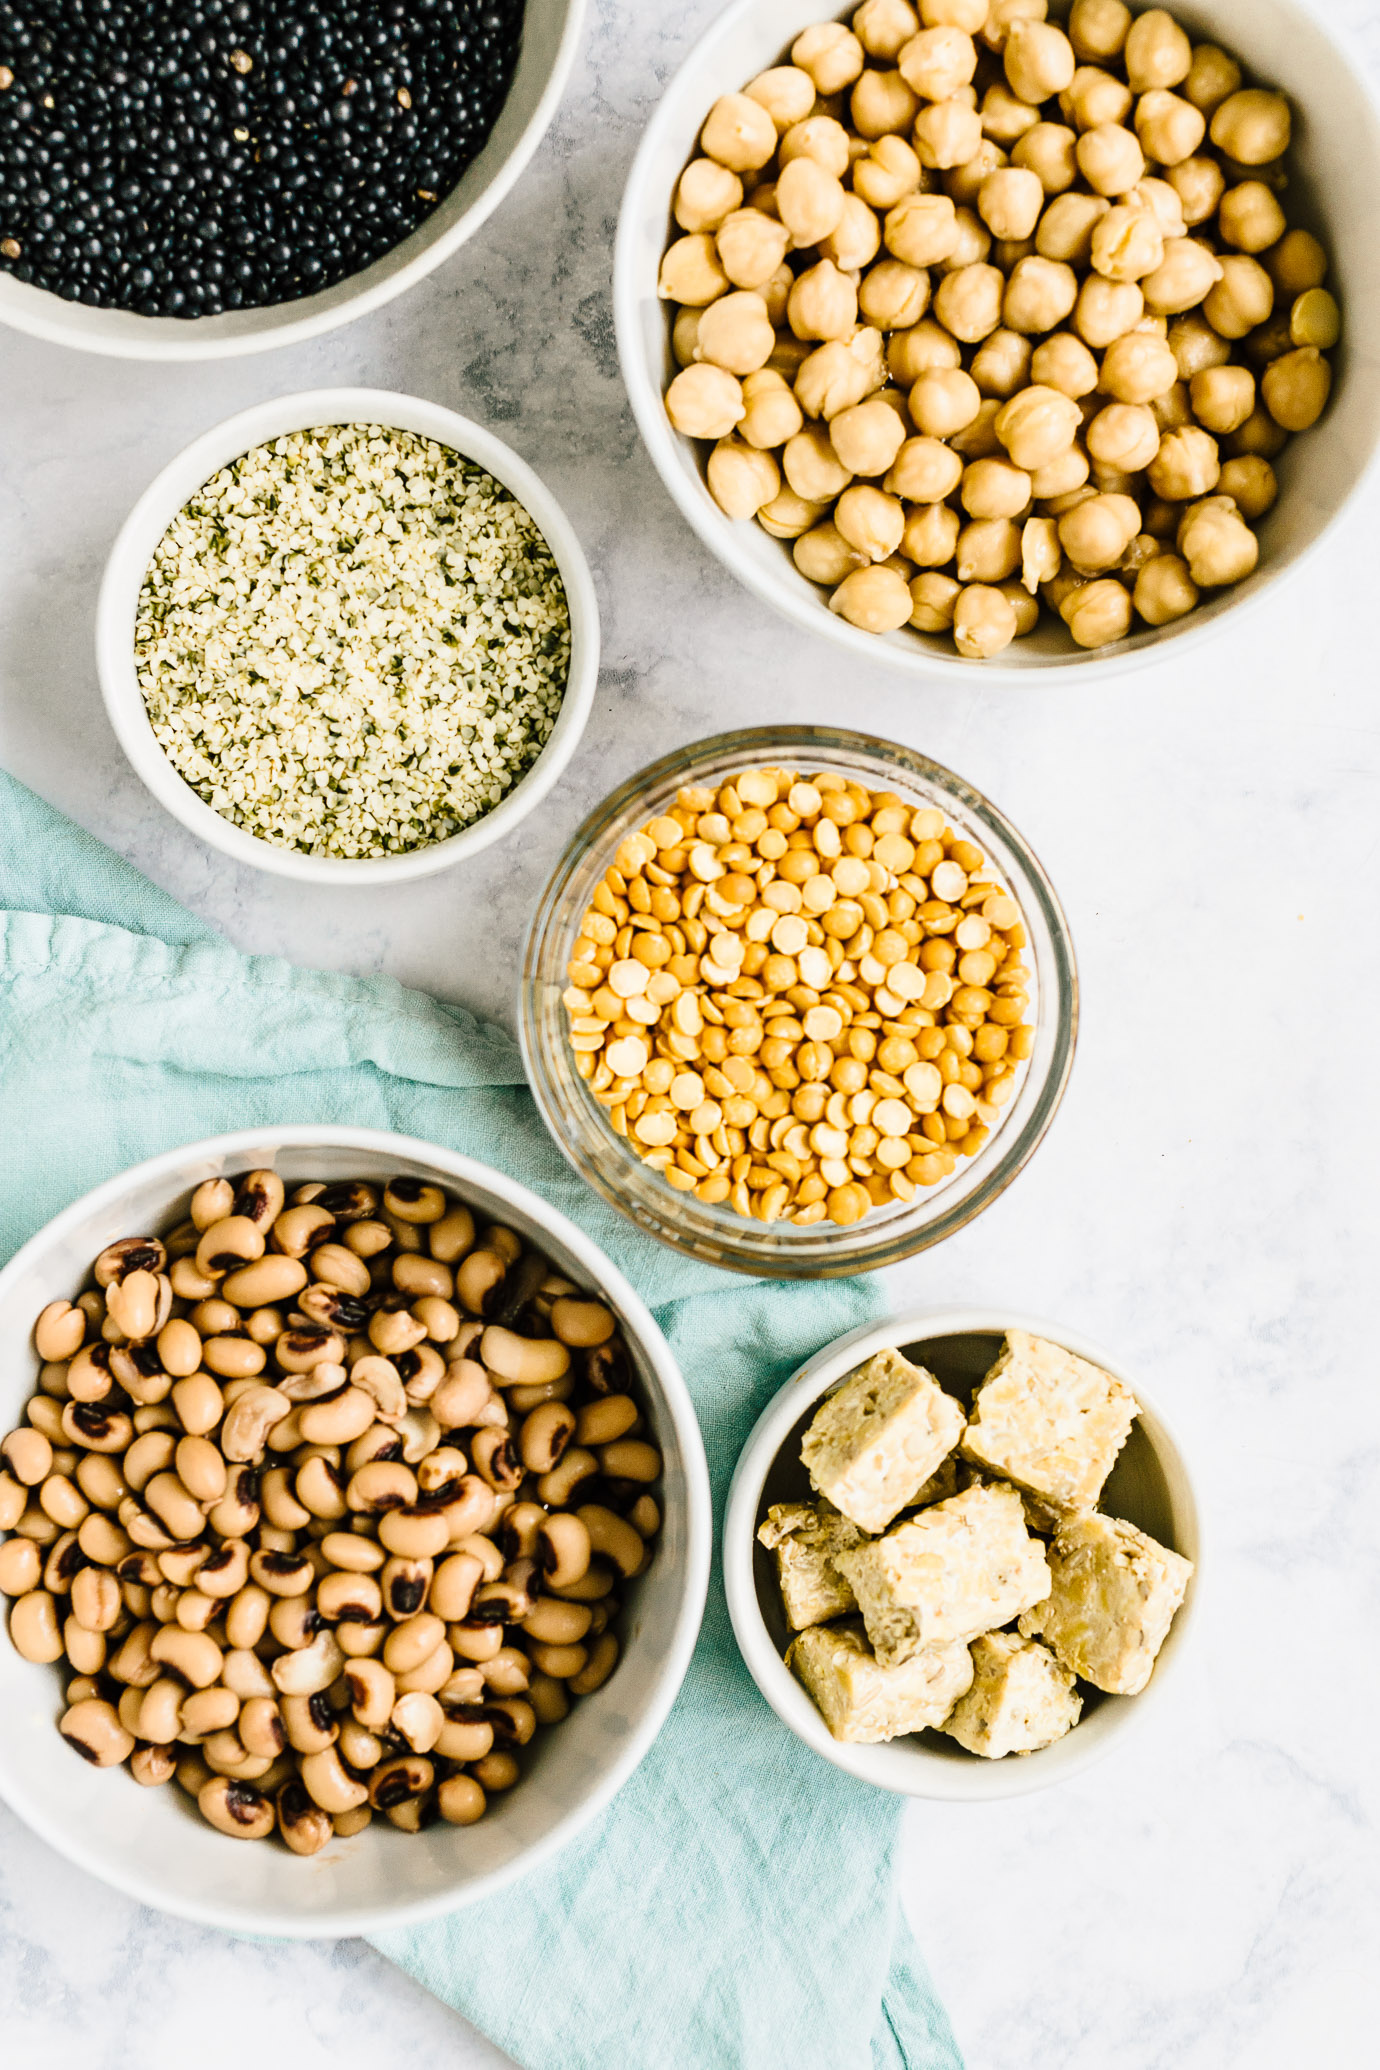 Best Plant-based protein sources in bowls